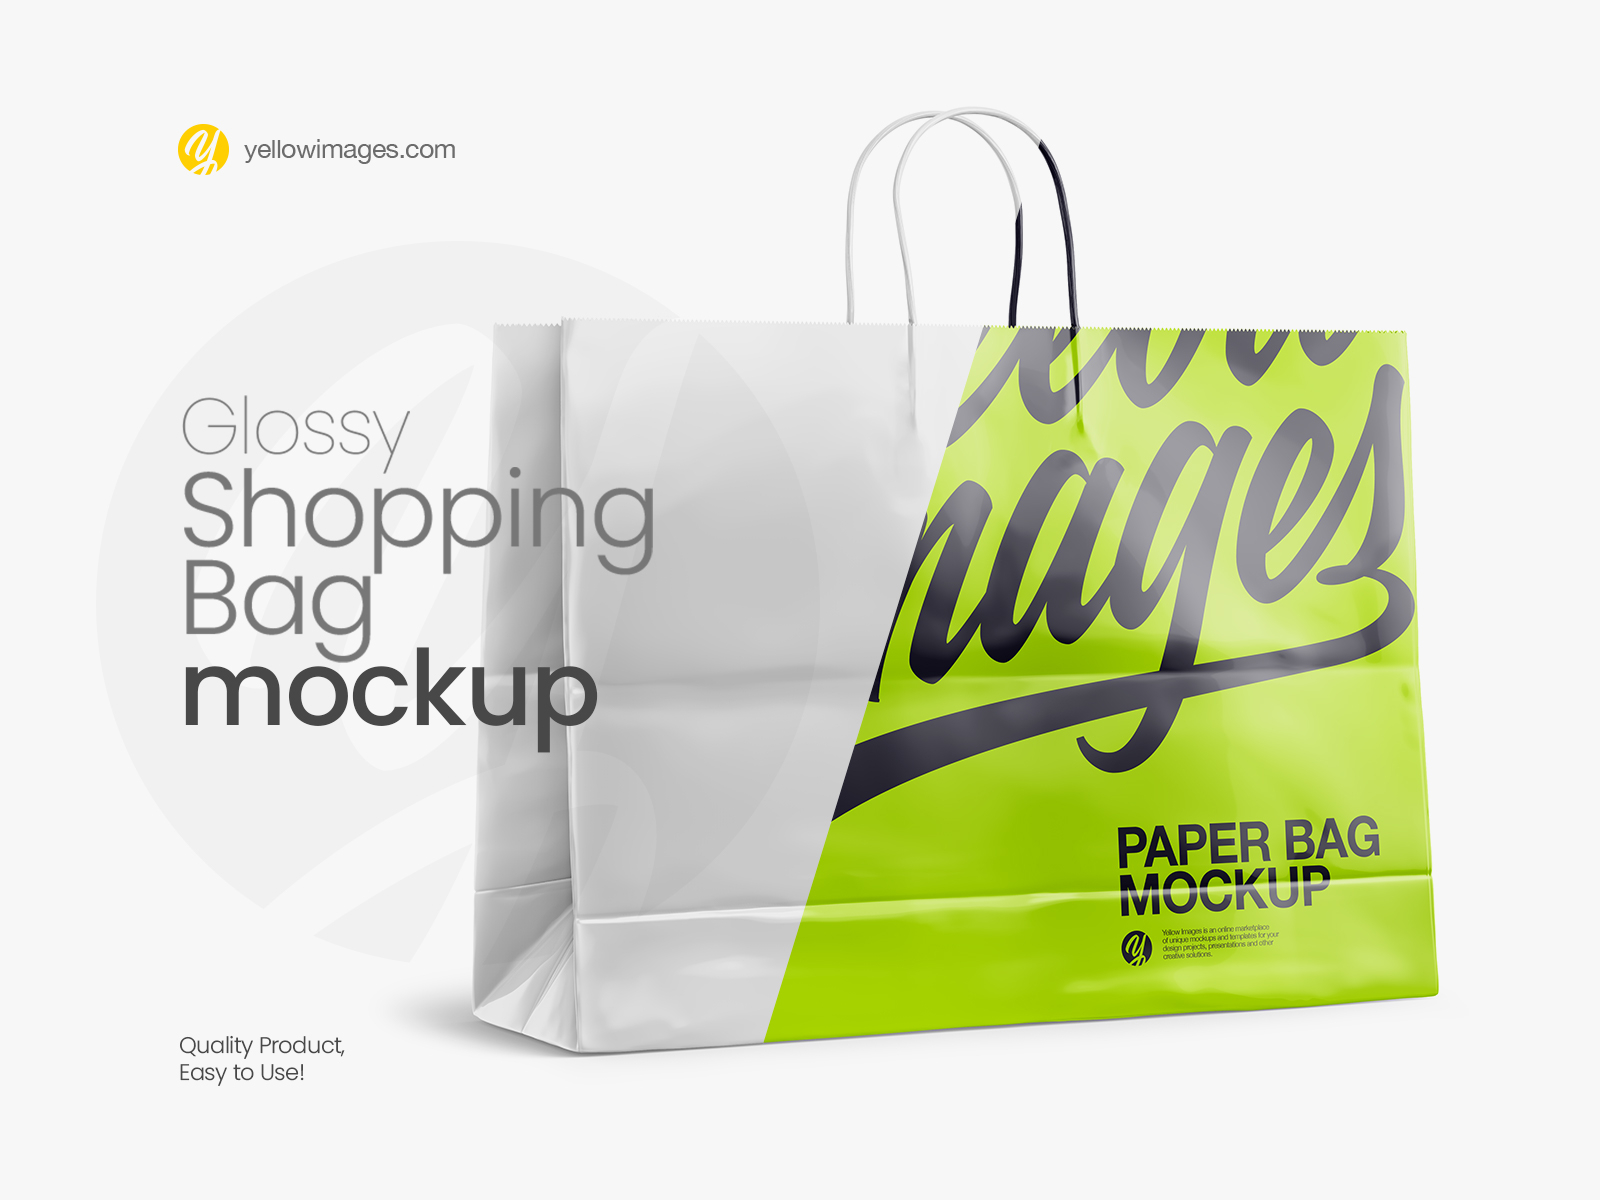 Download Psd Mockups Clear Bag With Almonds Halfside View Potoshop Yellowimages Mockups